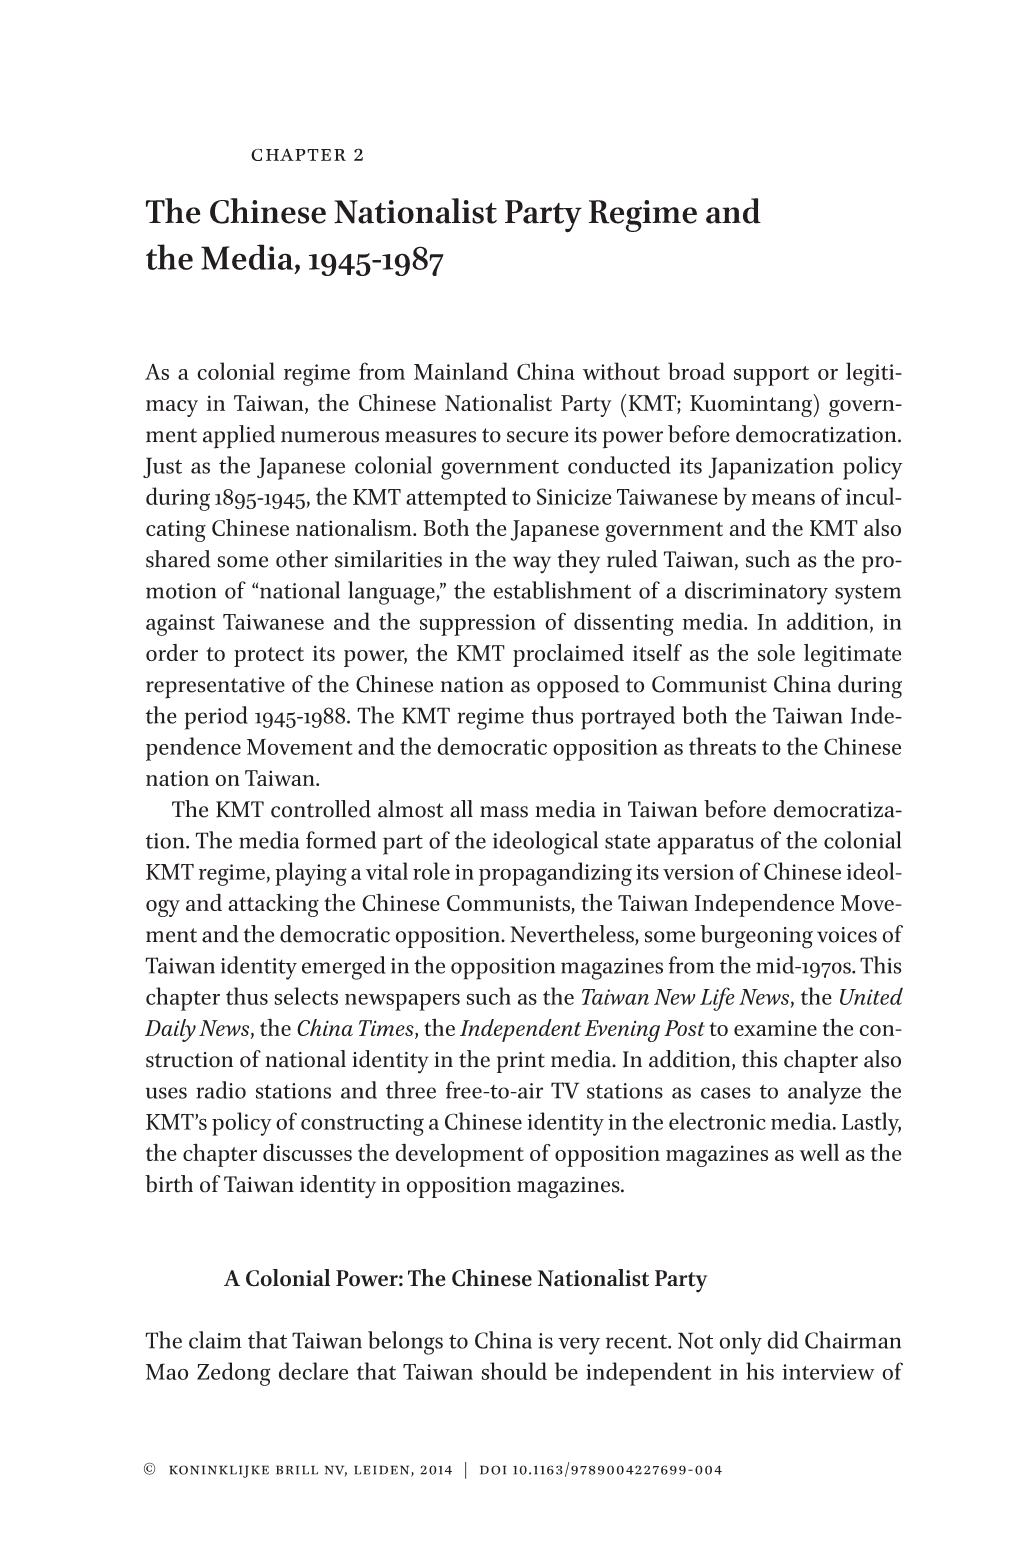 The Chinese Nationalist Party Regime and the Media, 1945-1987